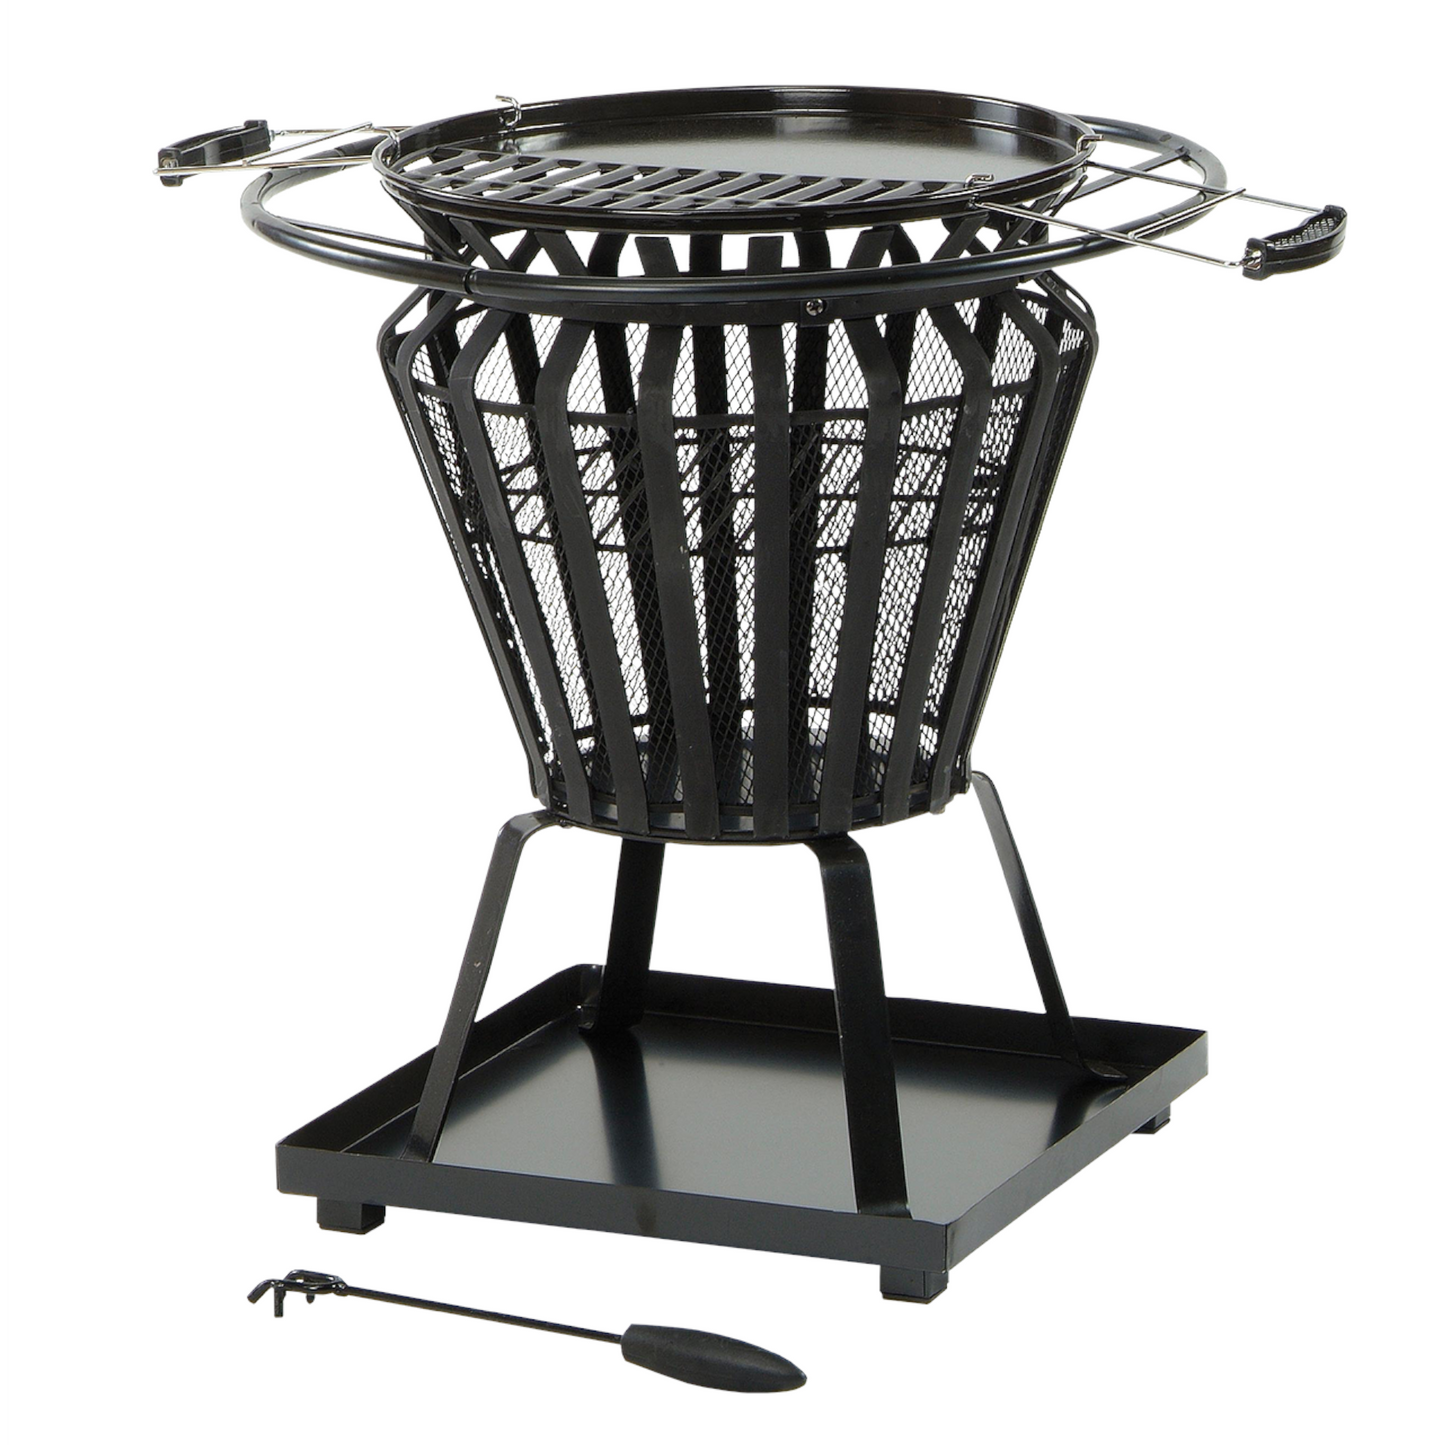 Lifestyle Signa Fire Basket with bbq grill